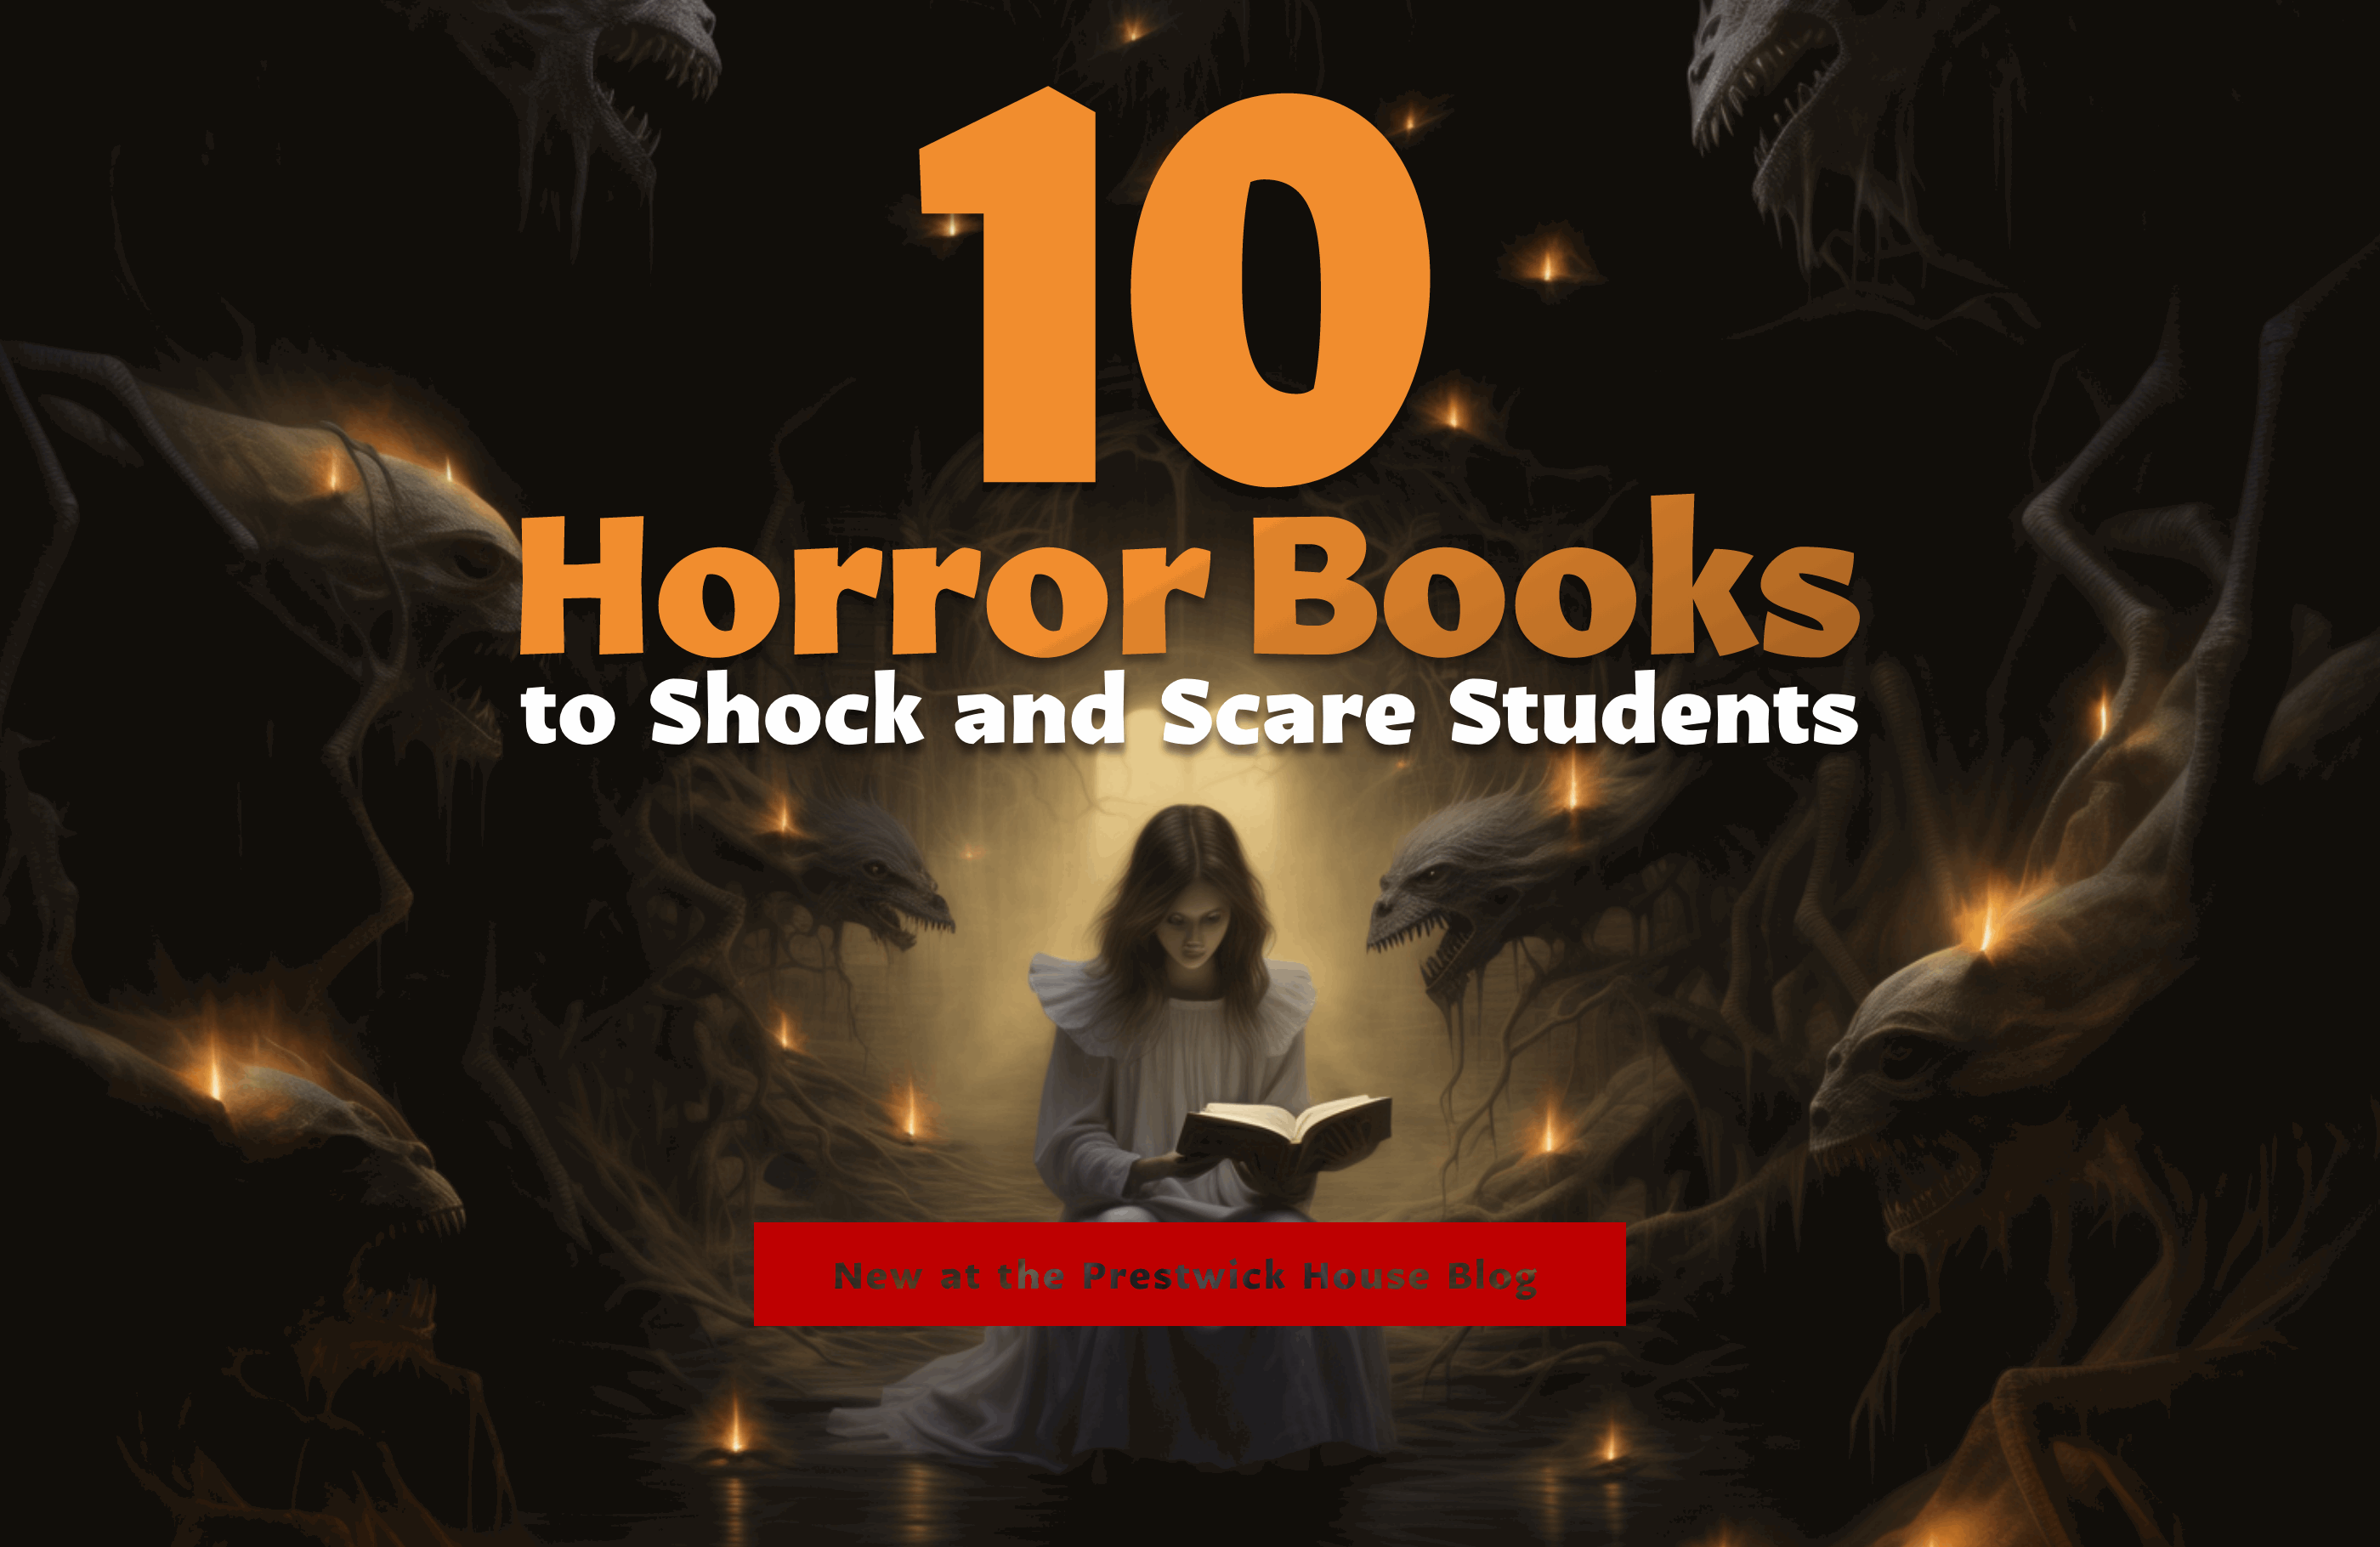 10 Horror Books to Shock and Scare Students